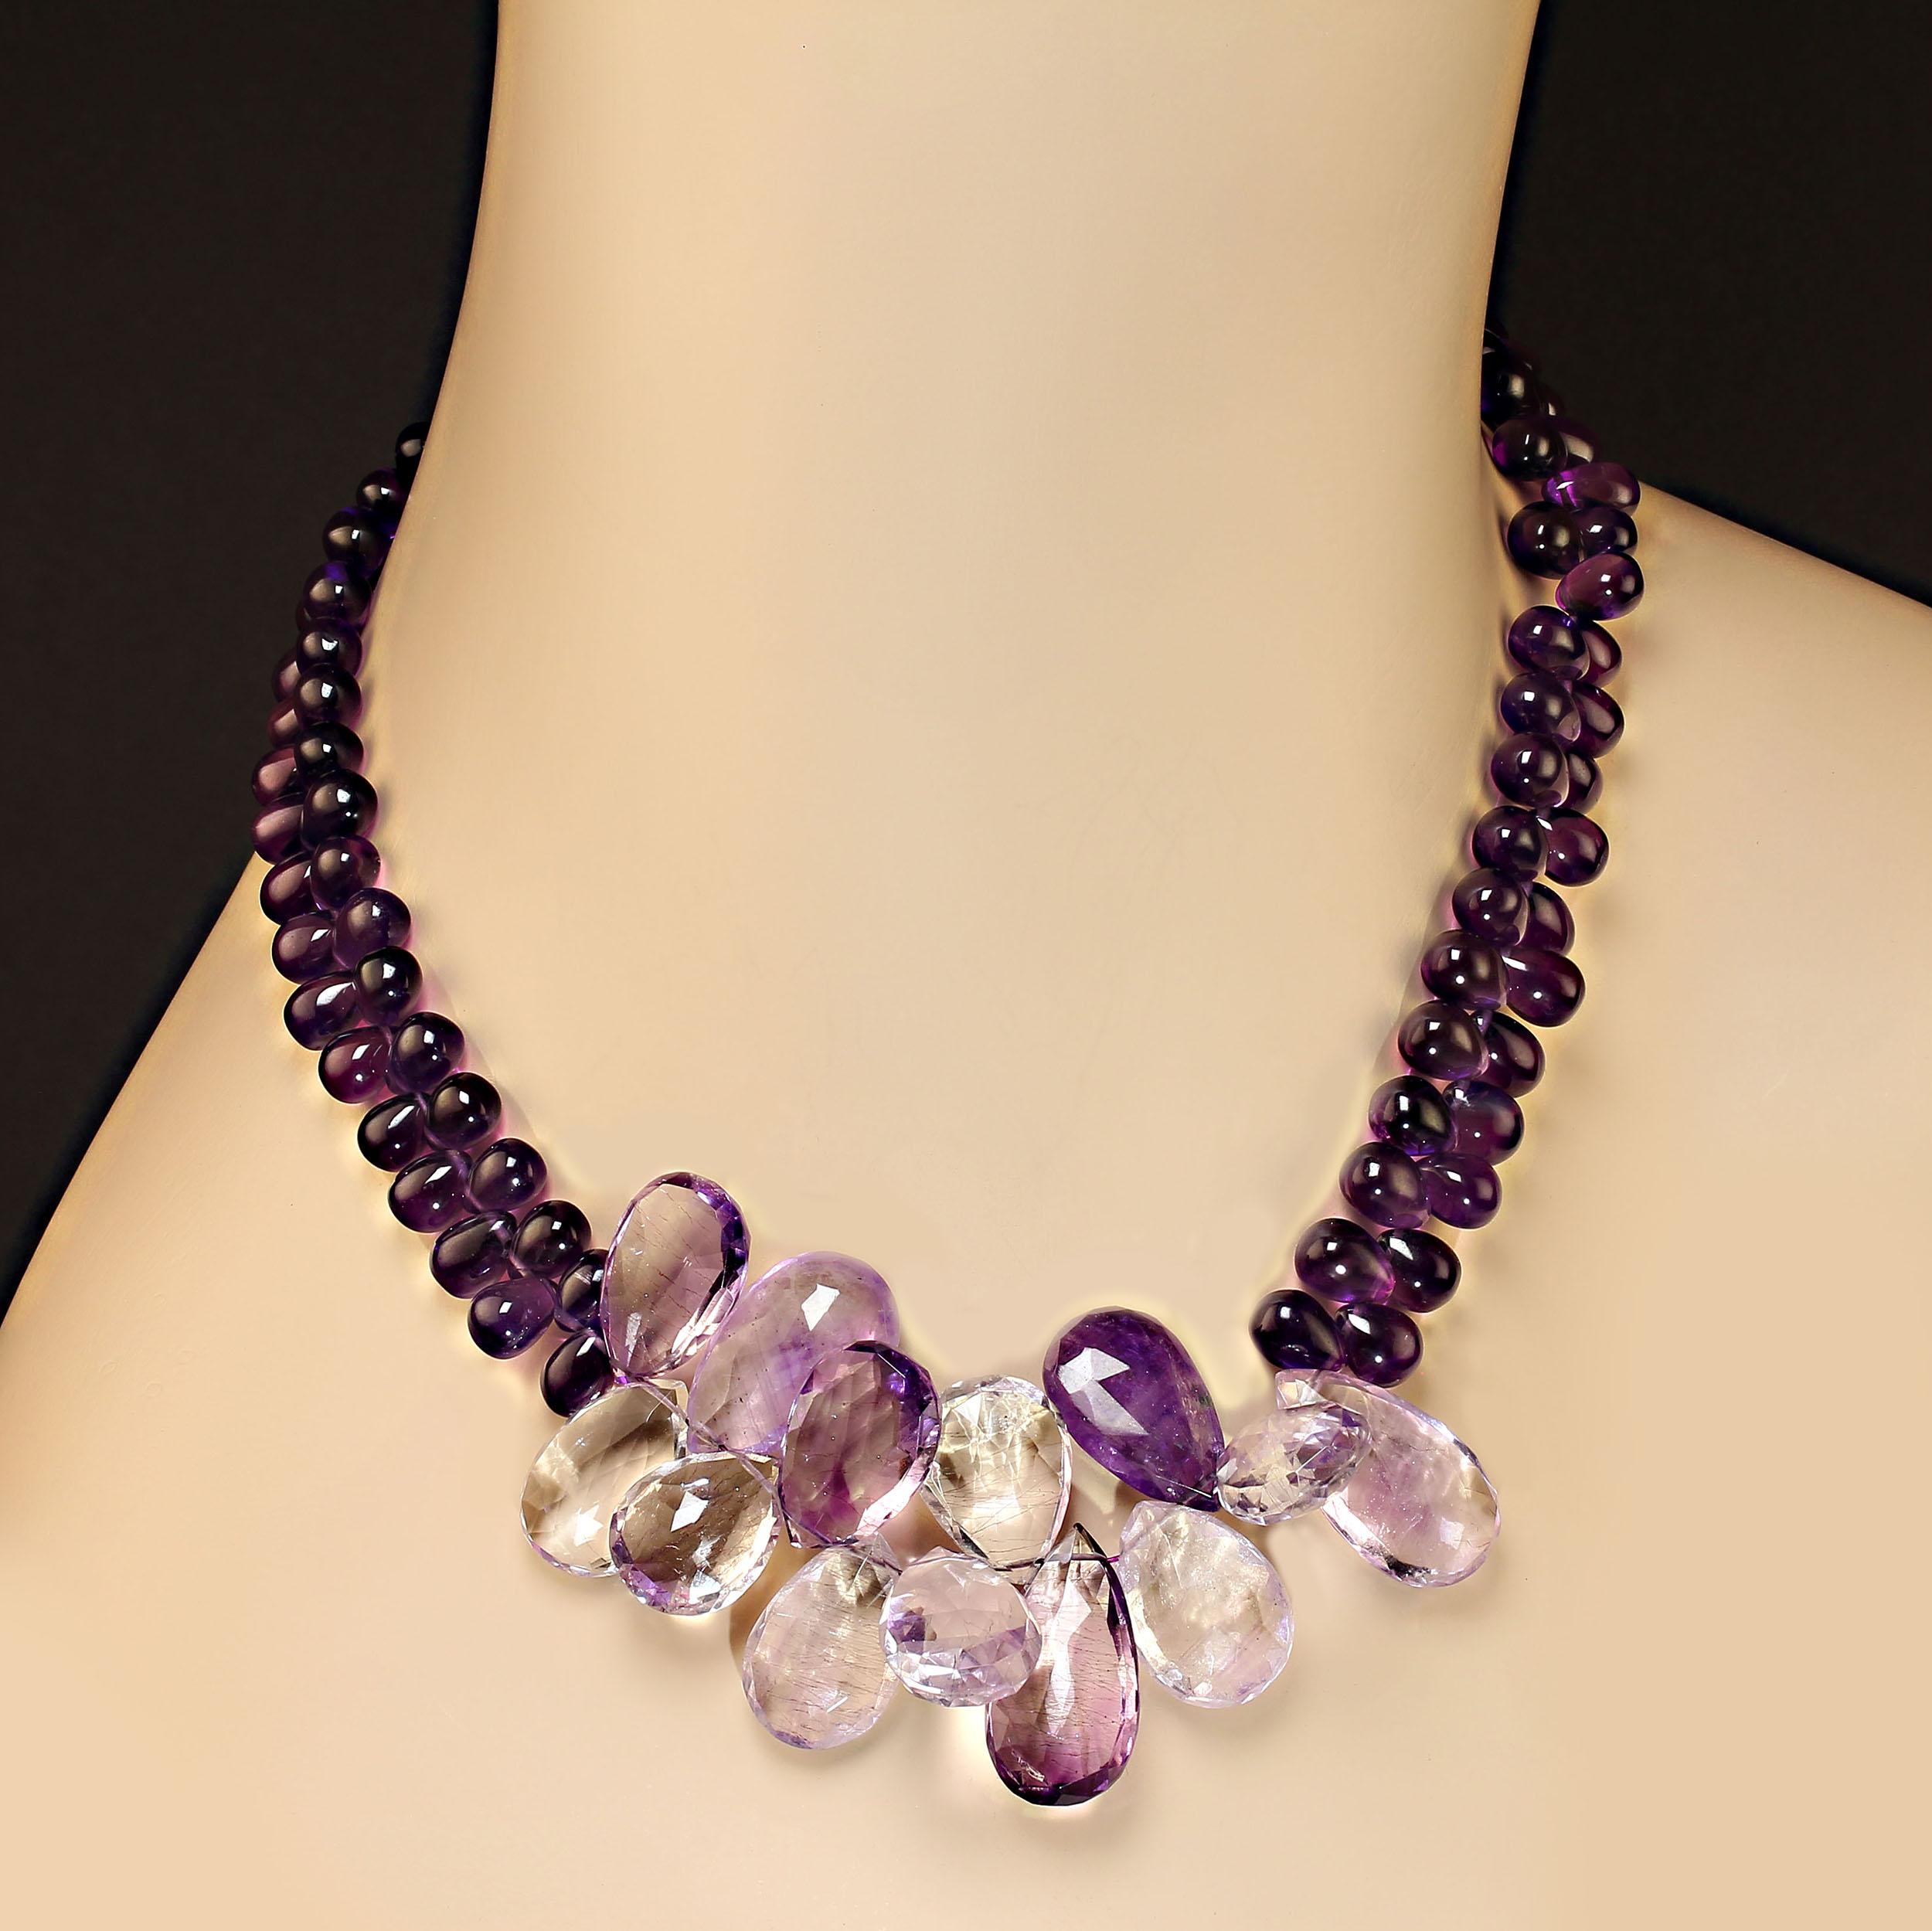 Artisan AJD Unique and Exquisite Amethyst 17 Inch necklace  Great February Gift! For Sale